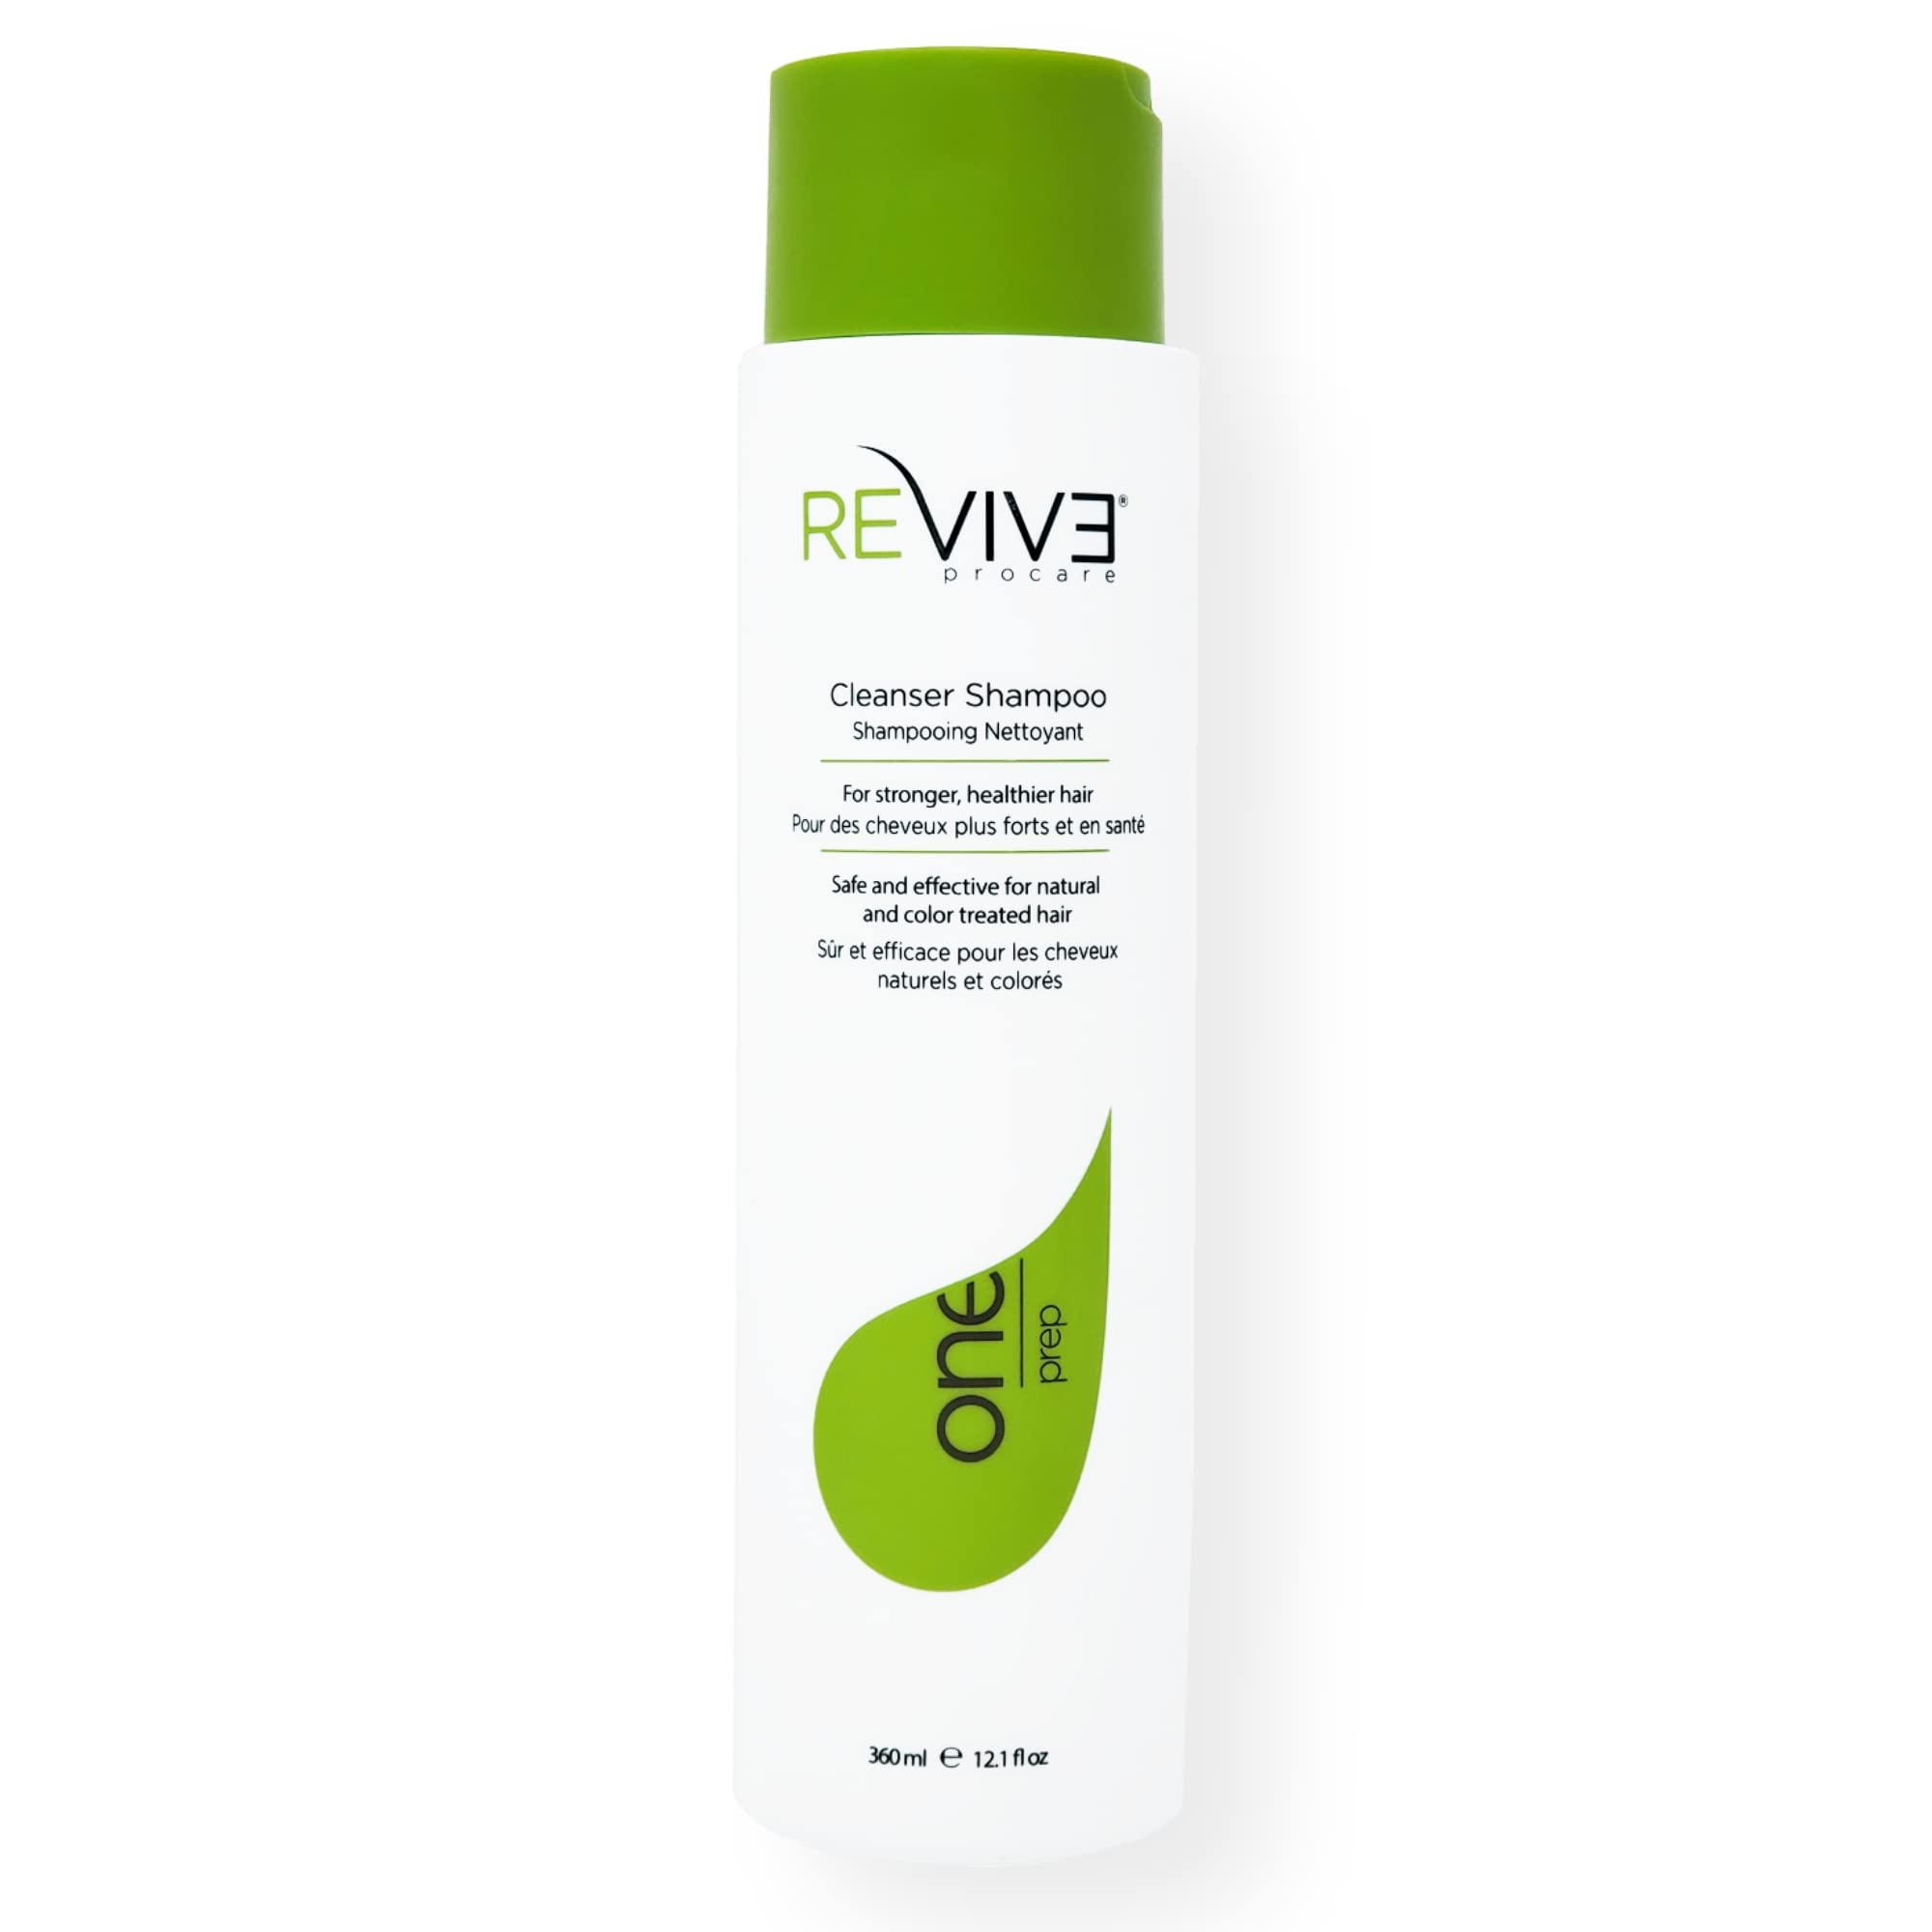 Reviv3 Procare PREP Cleanser Shampoo – Clinically Tested – Hair and Scalp Care Anti-Thinning and Fine Hair Cleansing Shampoo – Color Safe – All Hair Types – For Women and Men 12.1 fl. oz